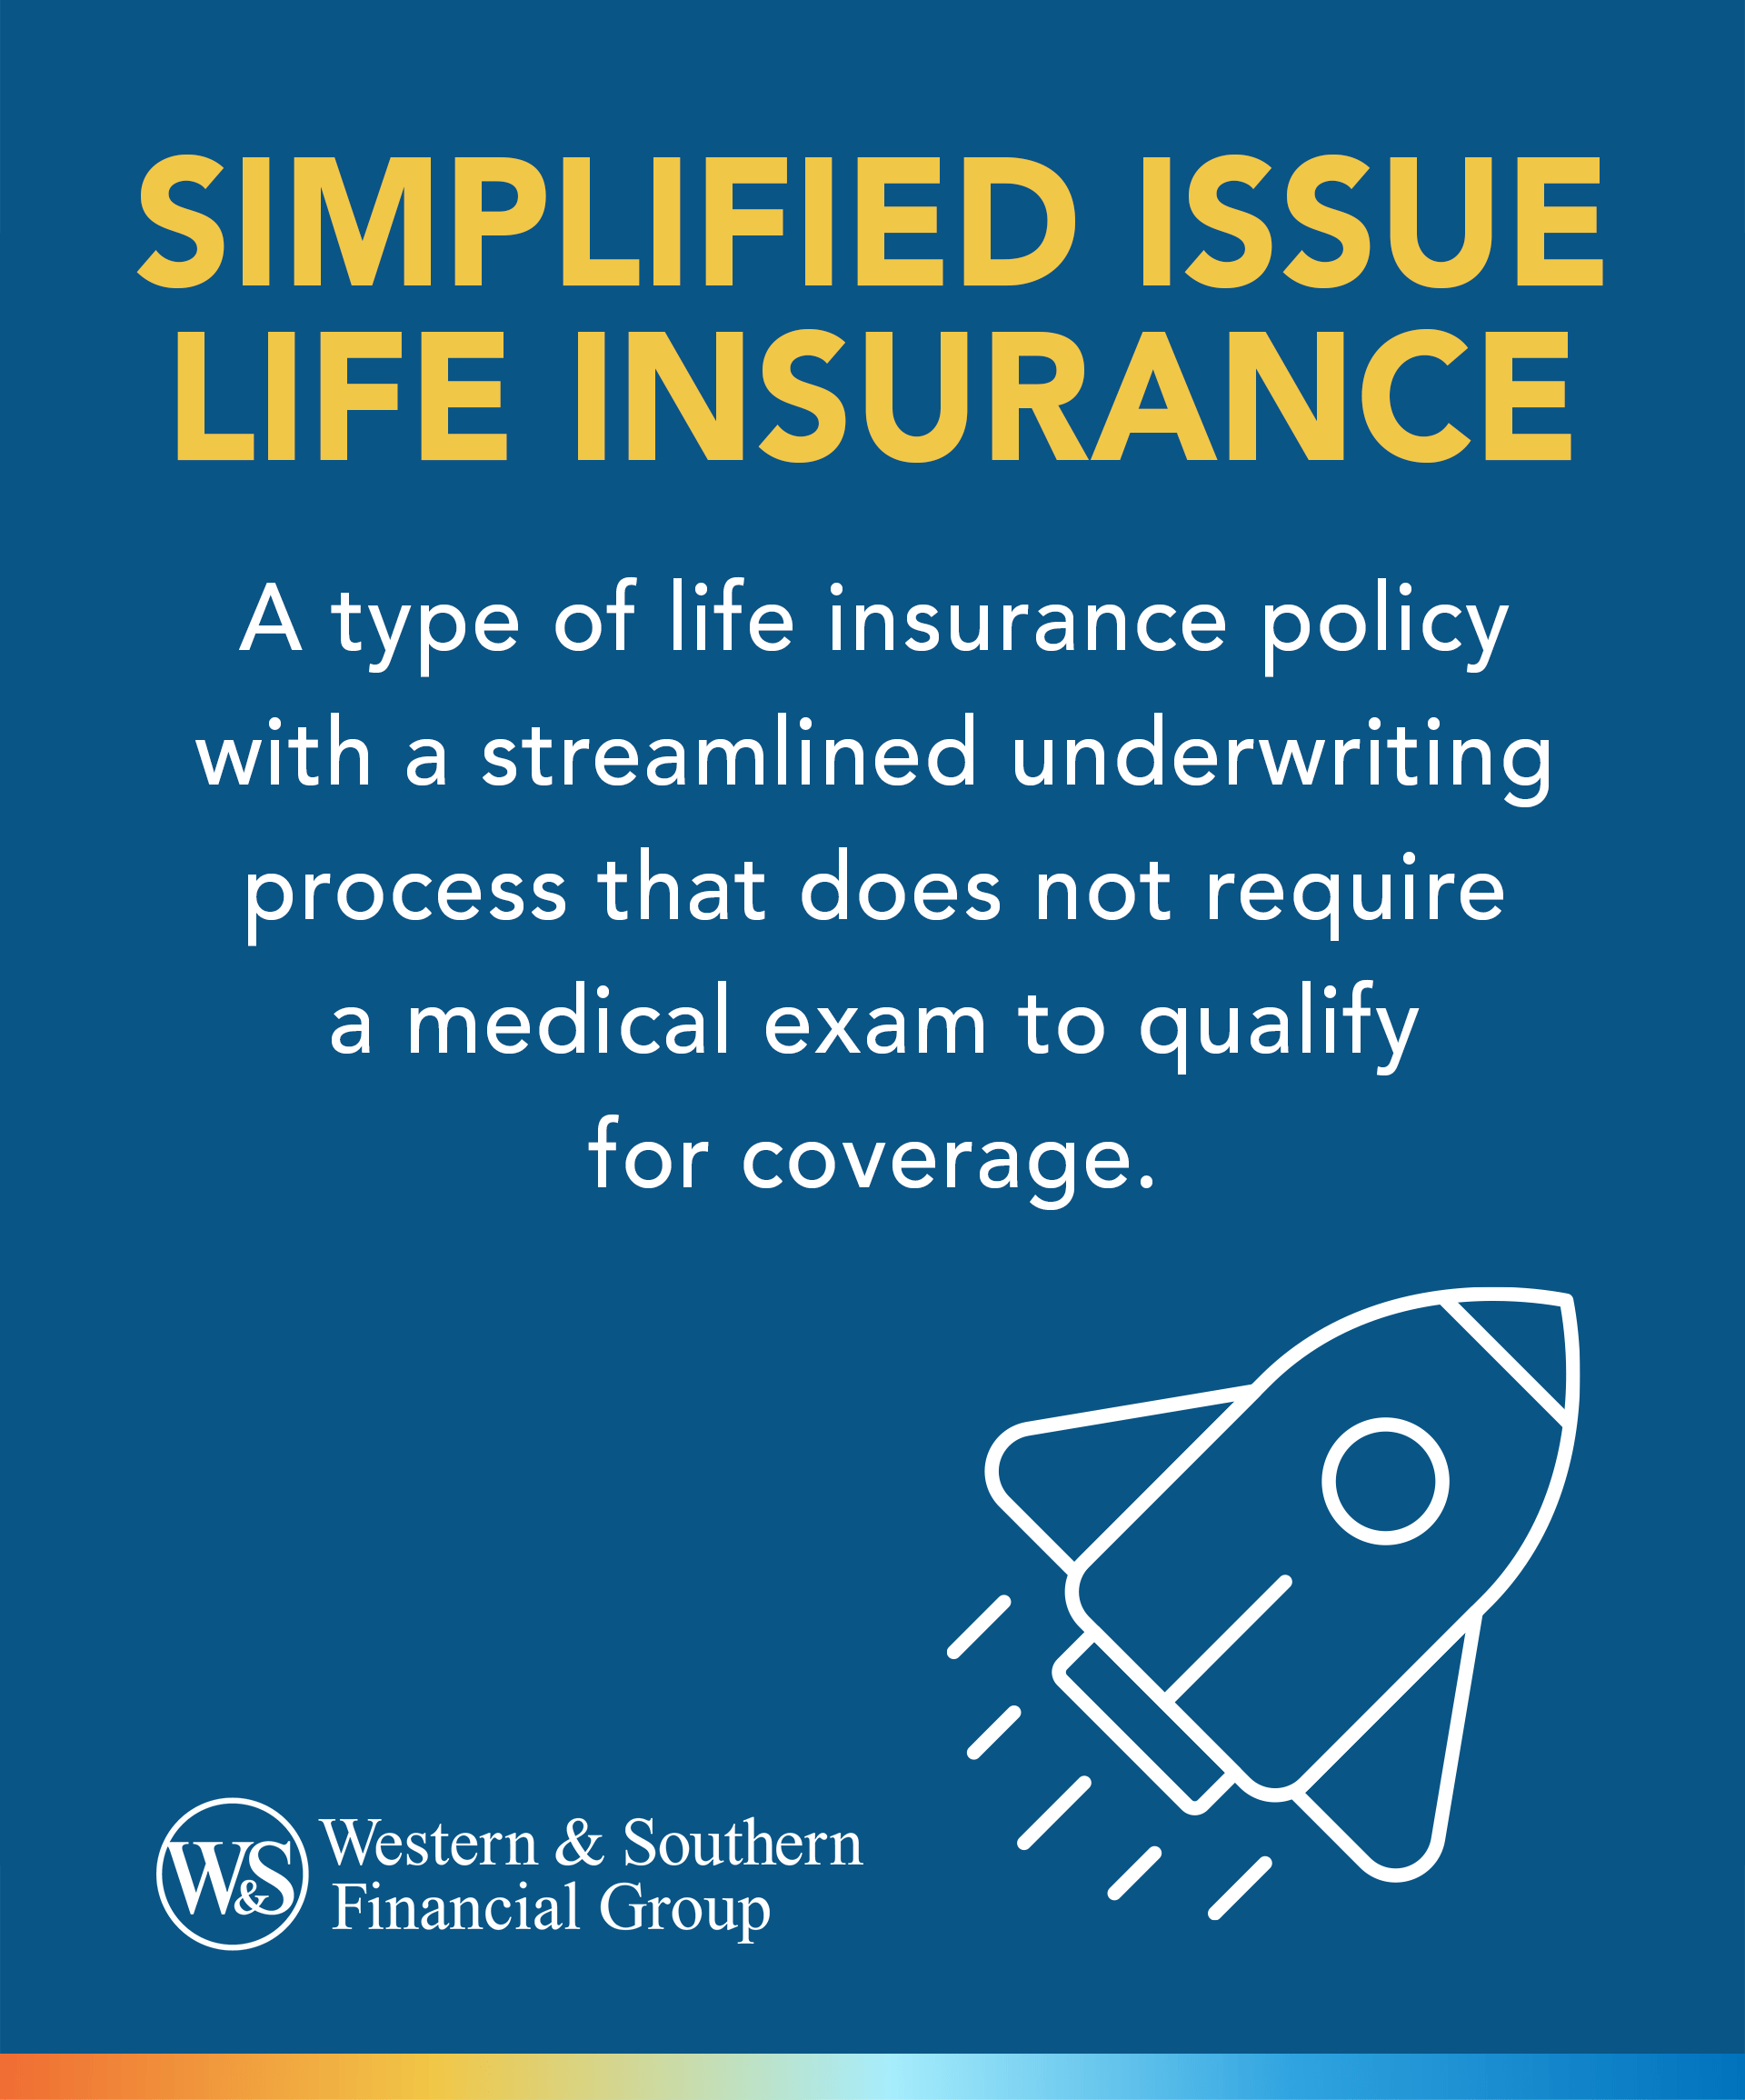 Simplified Issue Life Insurance is a type of life insurance policy with a streamlined underwriting process that does not require a medical exam to qualify for coverage.